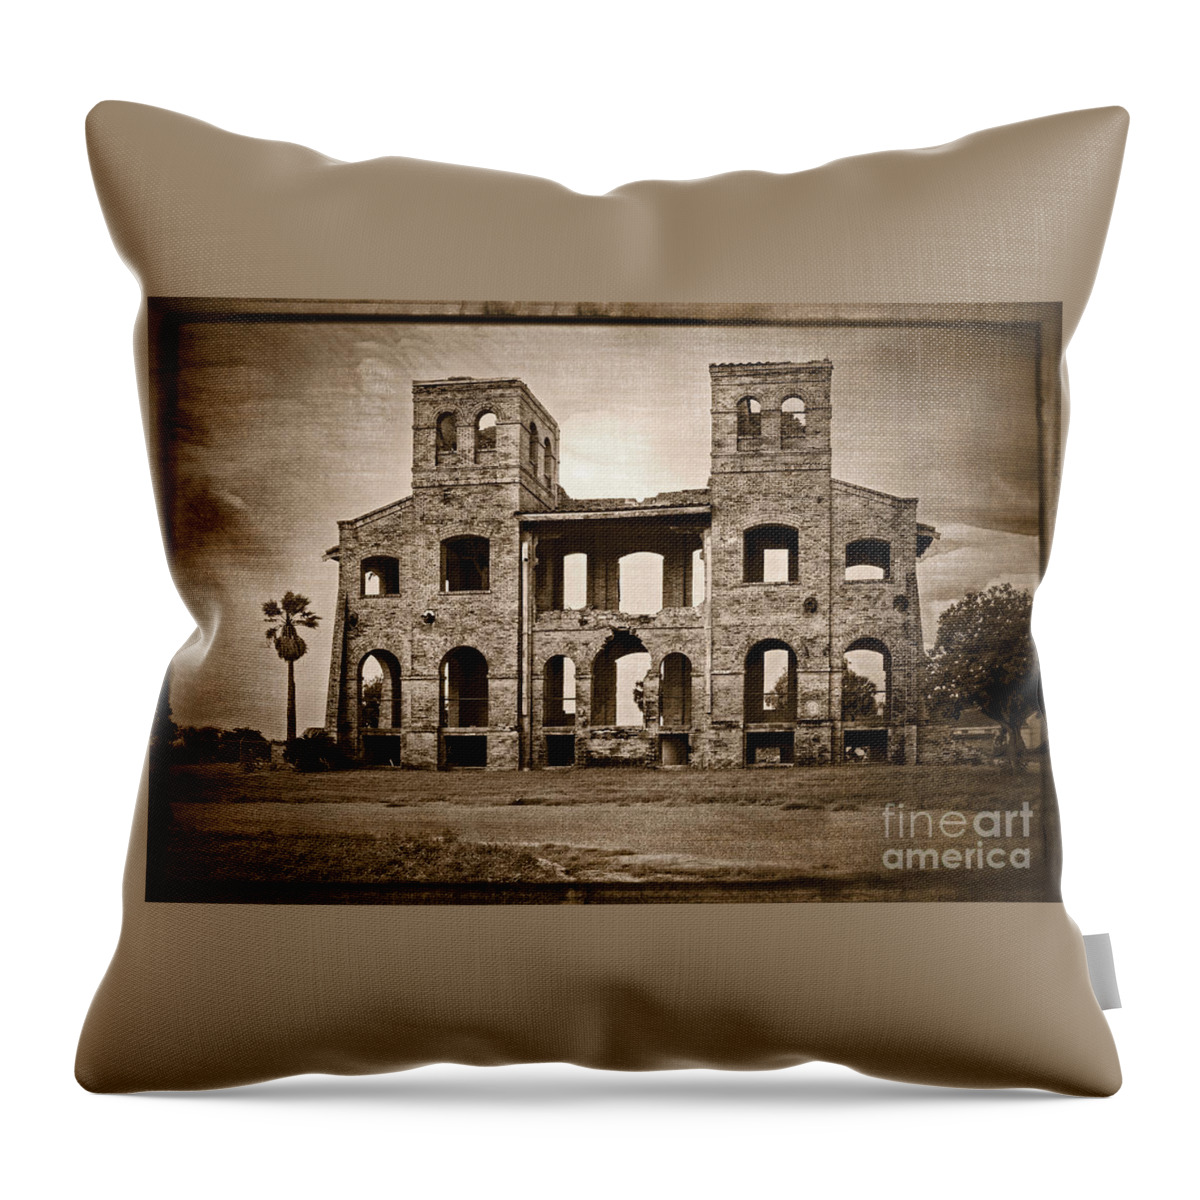 St Josephs And St Peters Seminary Throw Pillow featuring the photograph Seminary Ruins by Imagery by Charly